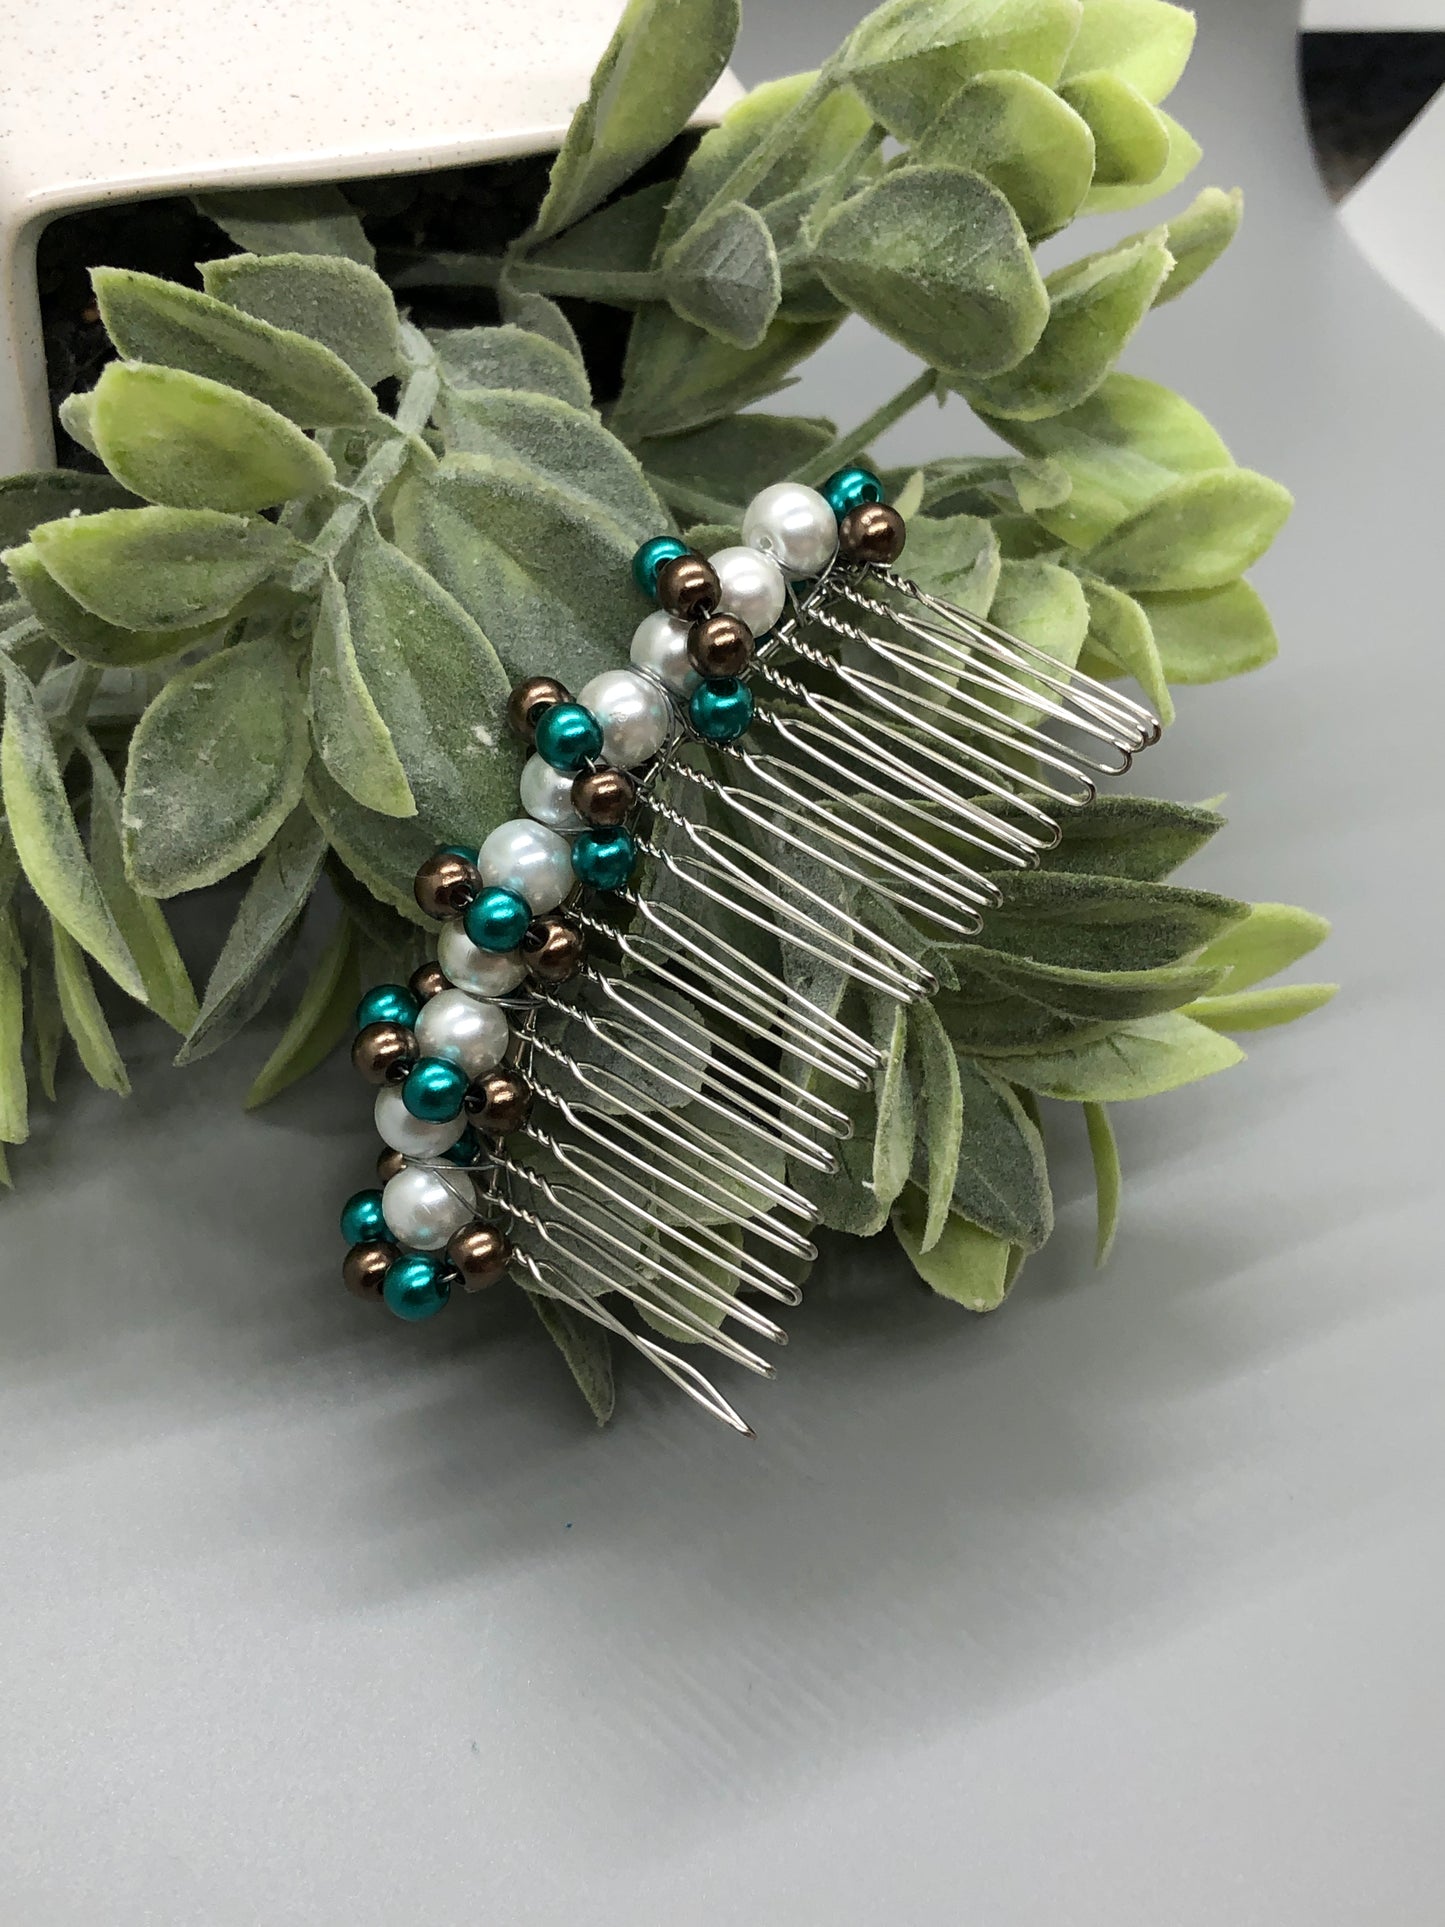 Purple White Teal Beaded  Hair Comb 3.5' Silver Metal Comb Retro Bridal Prom Wedding Party